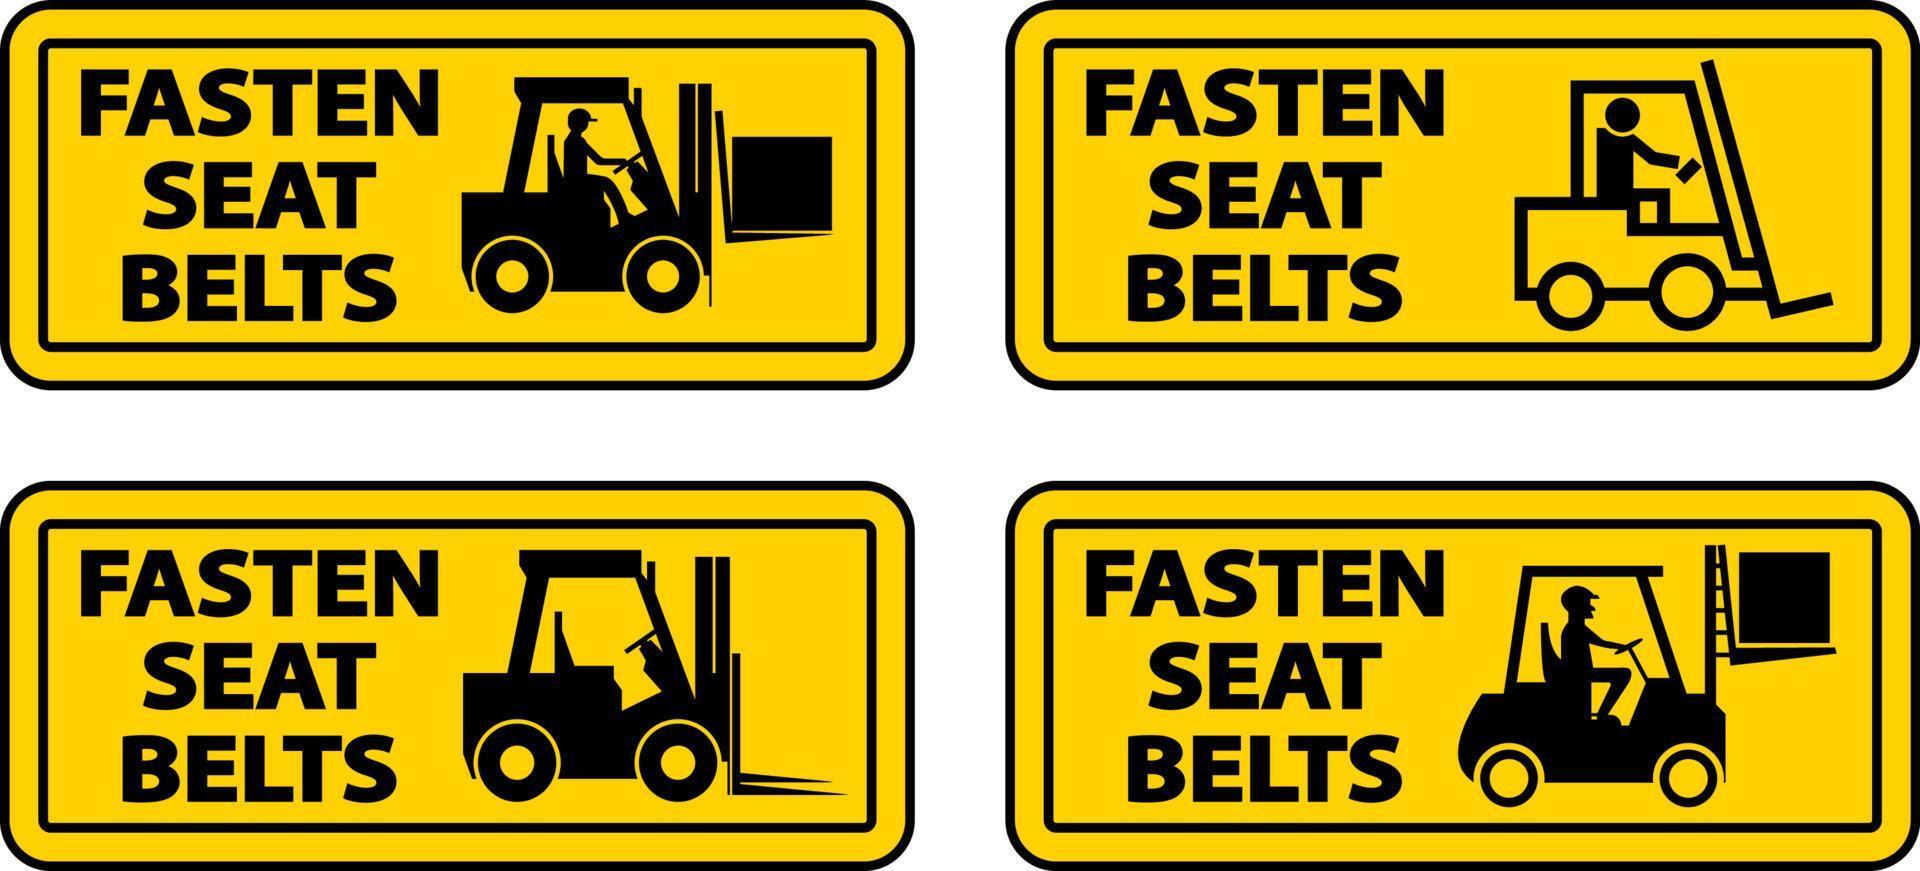 Fasten Seat Belts Label Sign On White Background vector